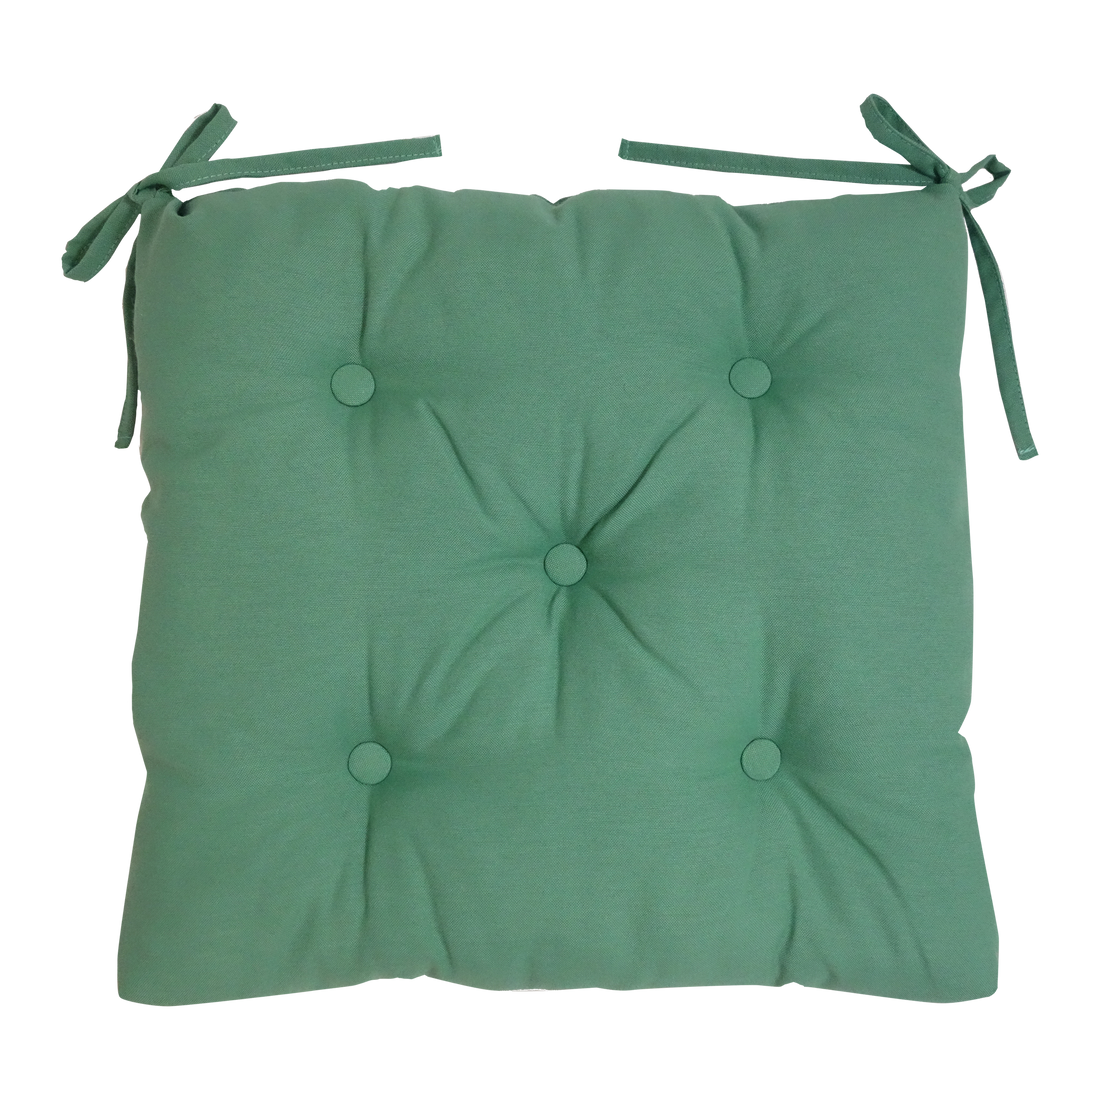 CHAIR COVER LUCK CACTUS GREEN 40X40X6 CM POLYCOTTON